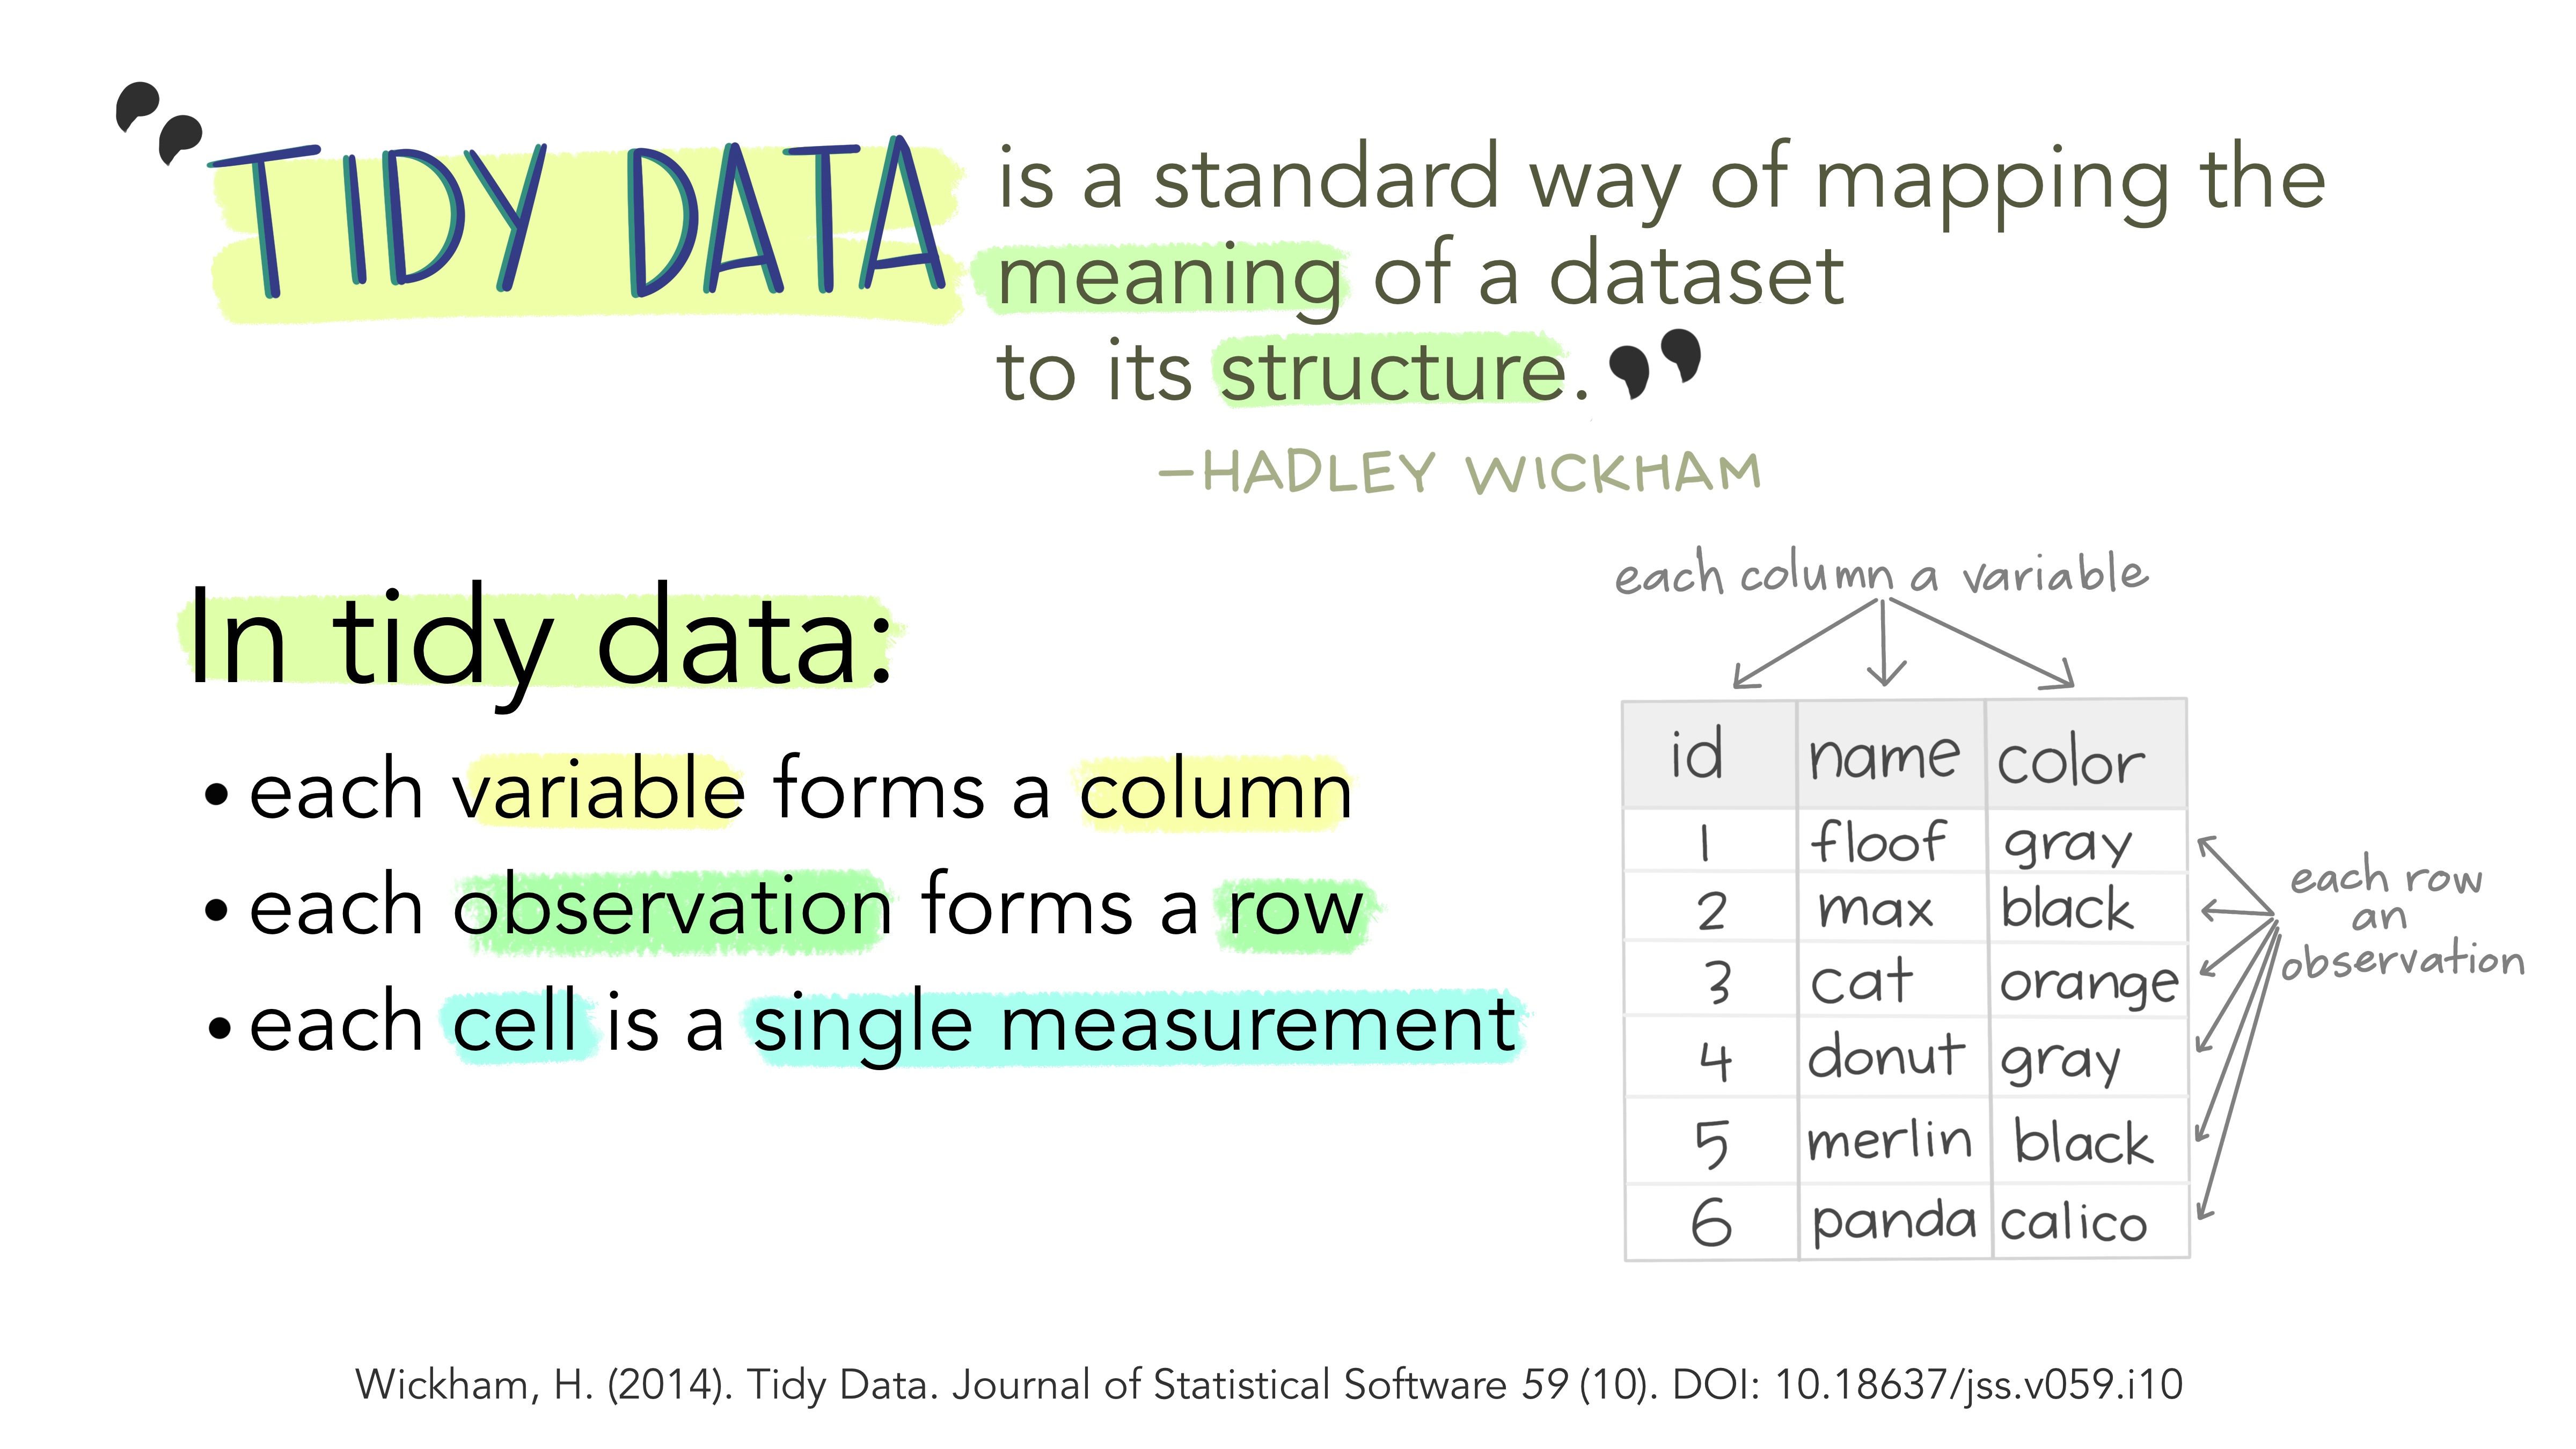 An image showing a quote by Hadley Wickham: 'Tidy data is a standard way of mapping the meaning of a dataset to its structure'